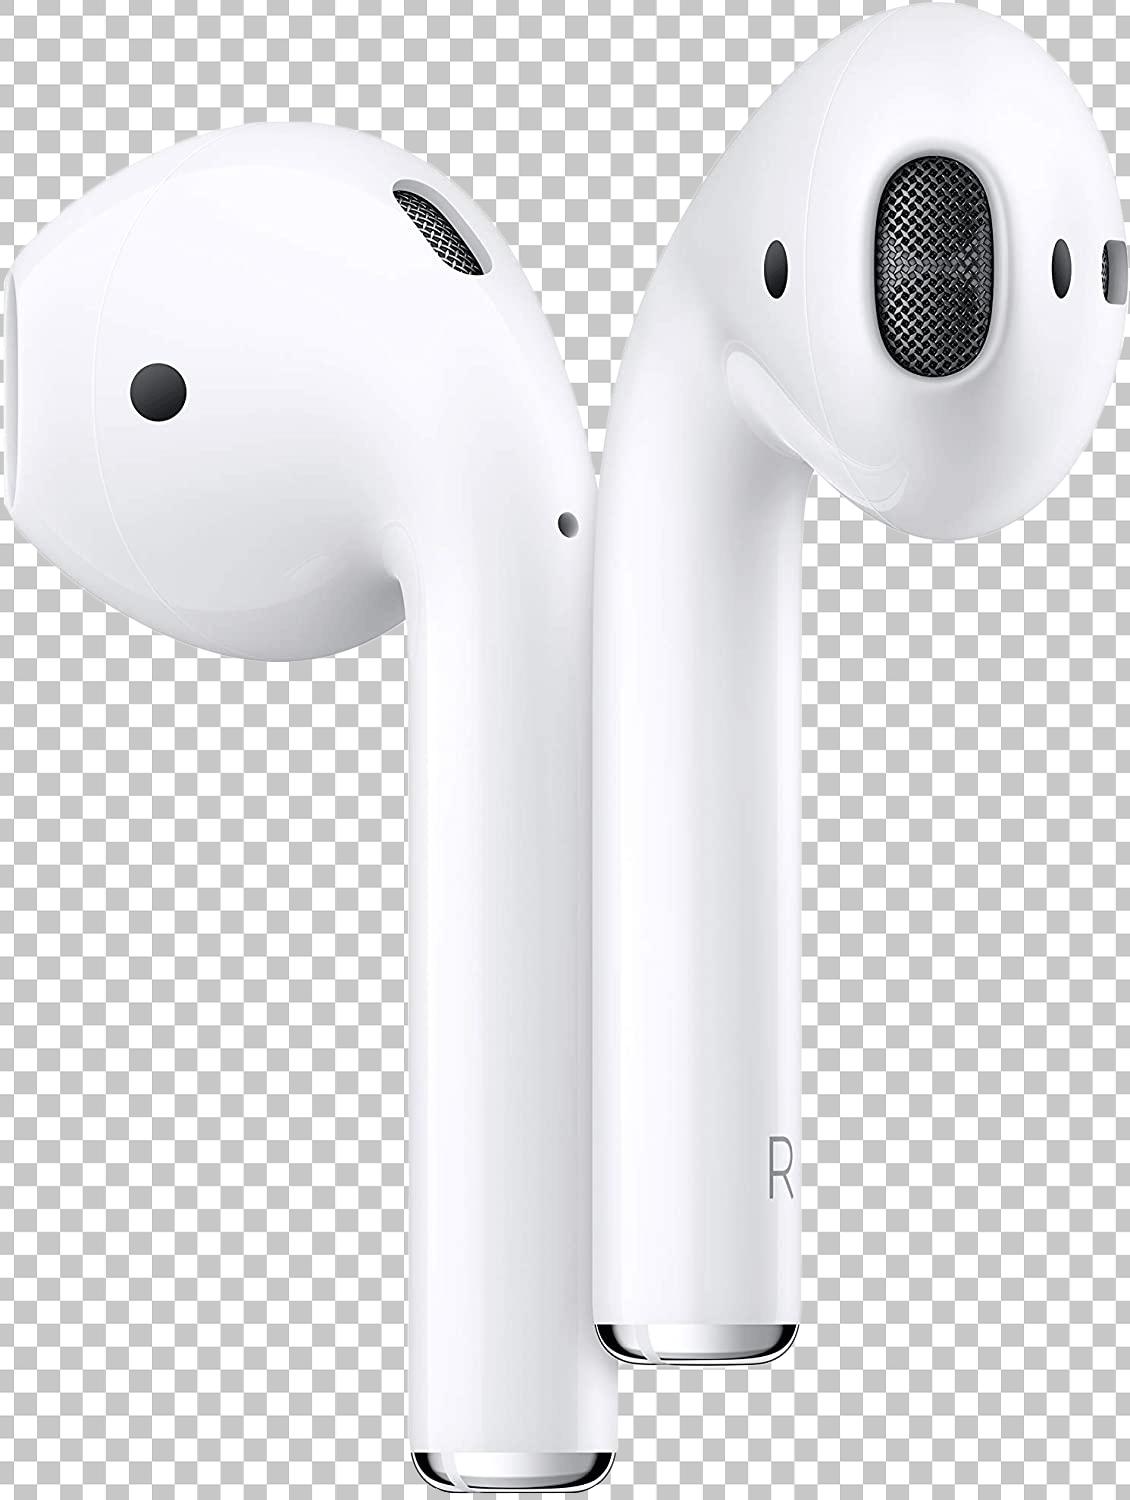 Apple airpods png image